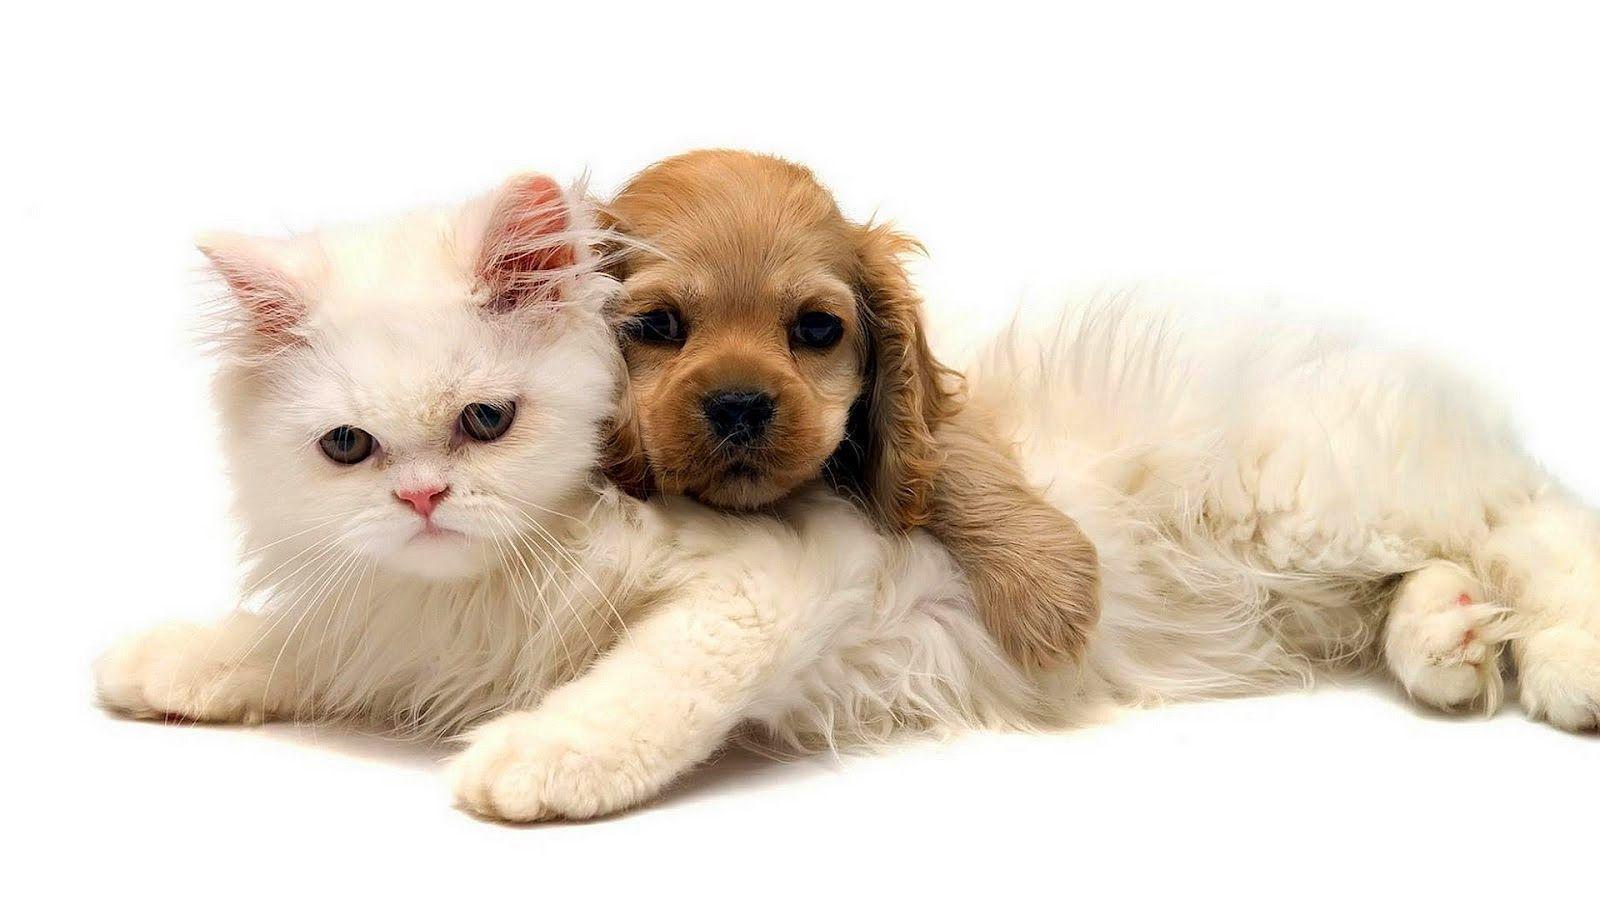 Cat and dog cuddling wallpapers